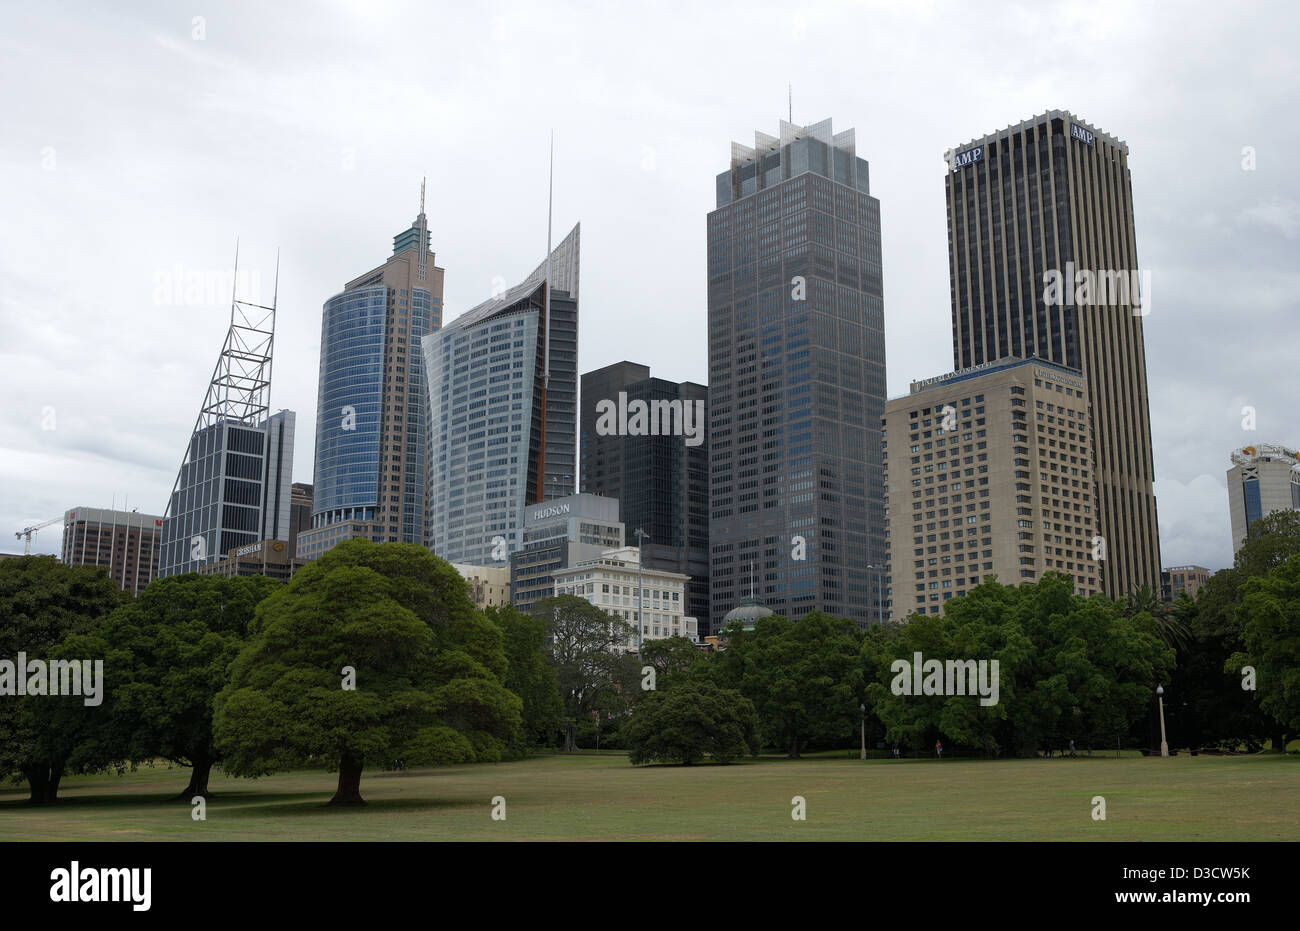 Sydney, Australia, skyscrapers of banks and insurance companies in the CBD Stock Photo